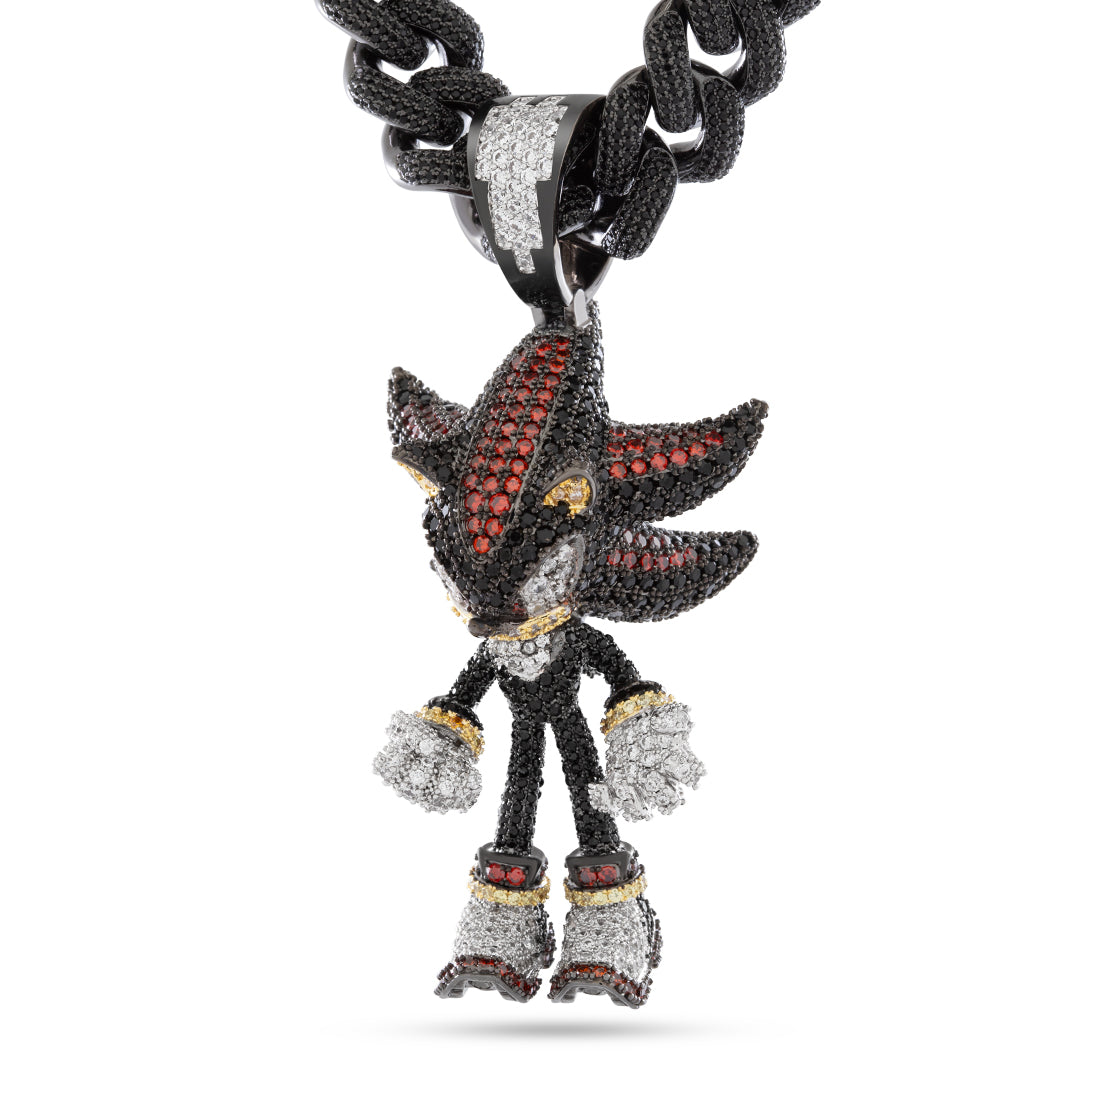 Sonic the Hedgehog x King Ice - Shadow Necklace